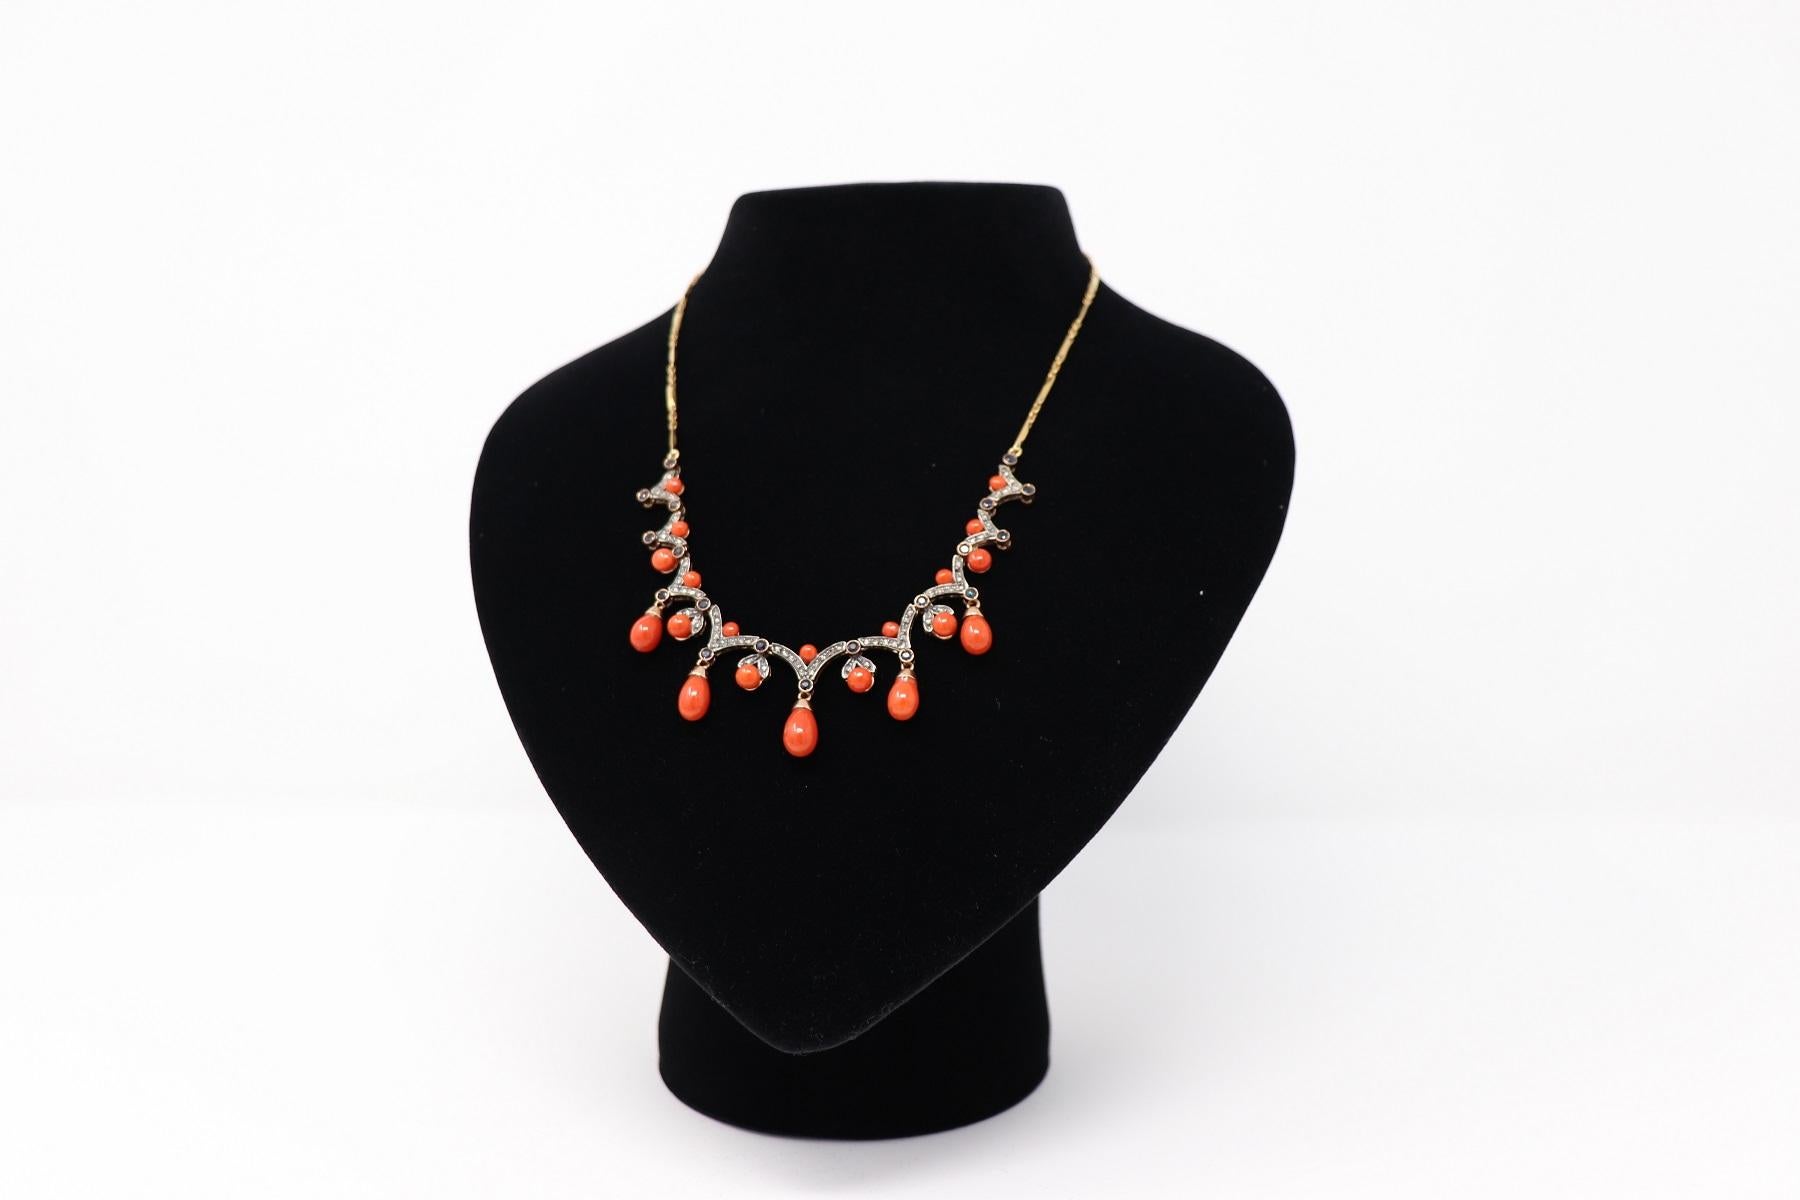 Refined necklace in 18 karat gold chain characterized by drop-shaped coral pendants alternated with blue sapphires and diamonds. Necklace of great elegance Italian goldsmith production. This necklace ideal for an elegant summer evening.